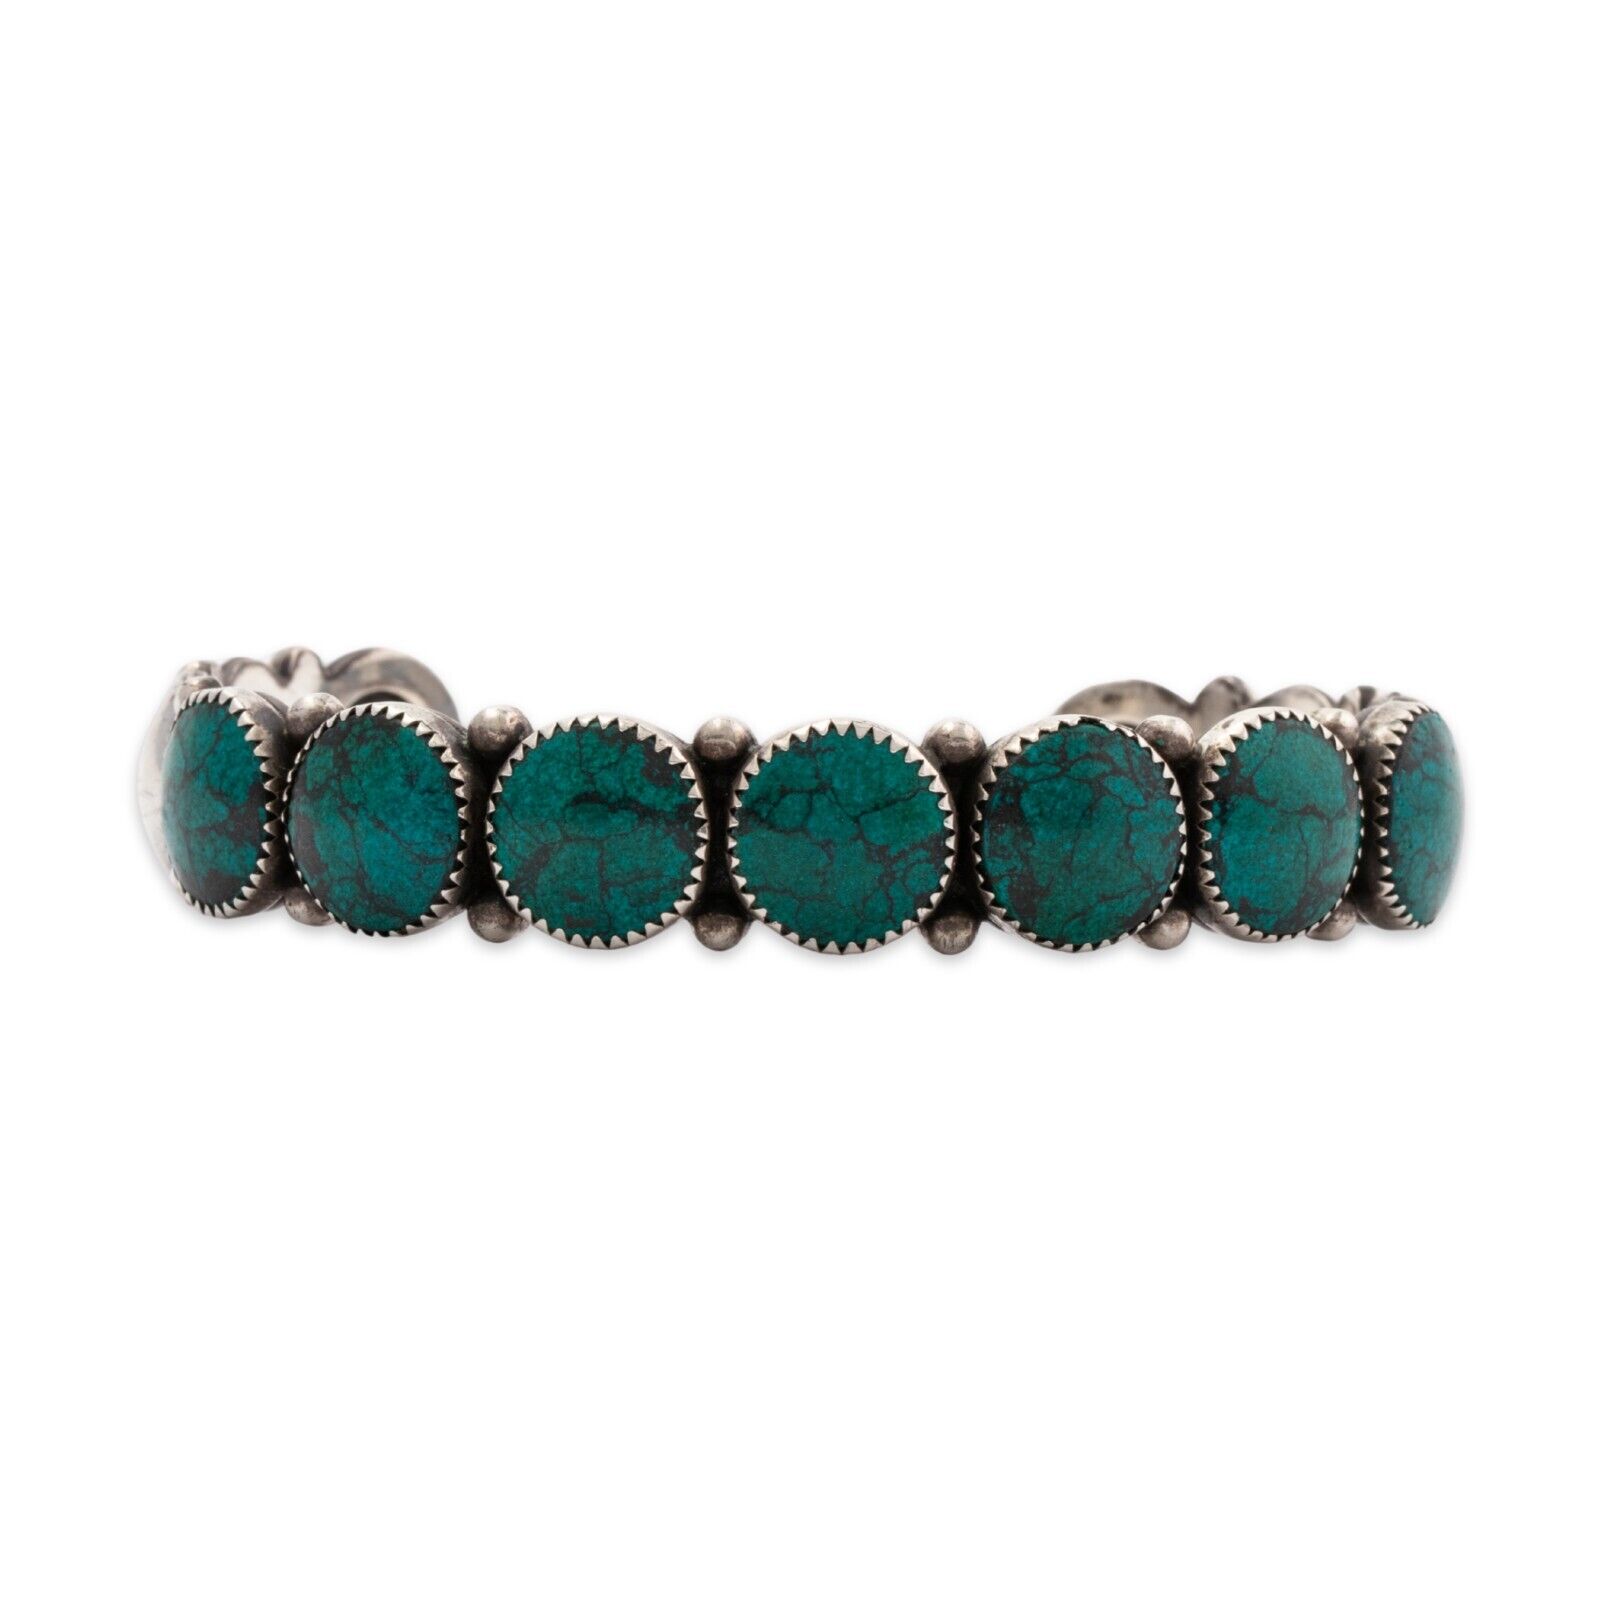 NATIVE FRED HARVEY ERA STERLING SYNTHETIC TURQUOISE RAIN DROPS CUFF BRACELET 7